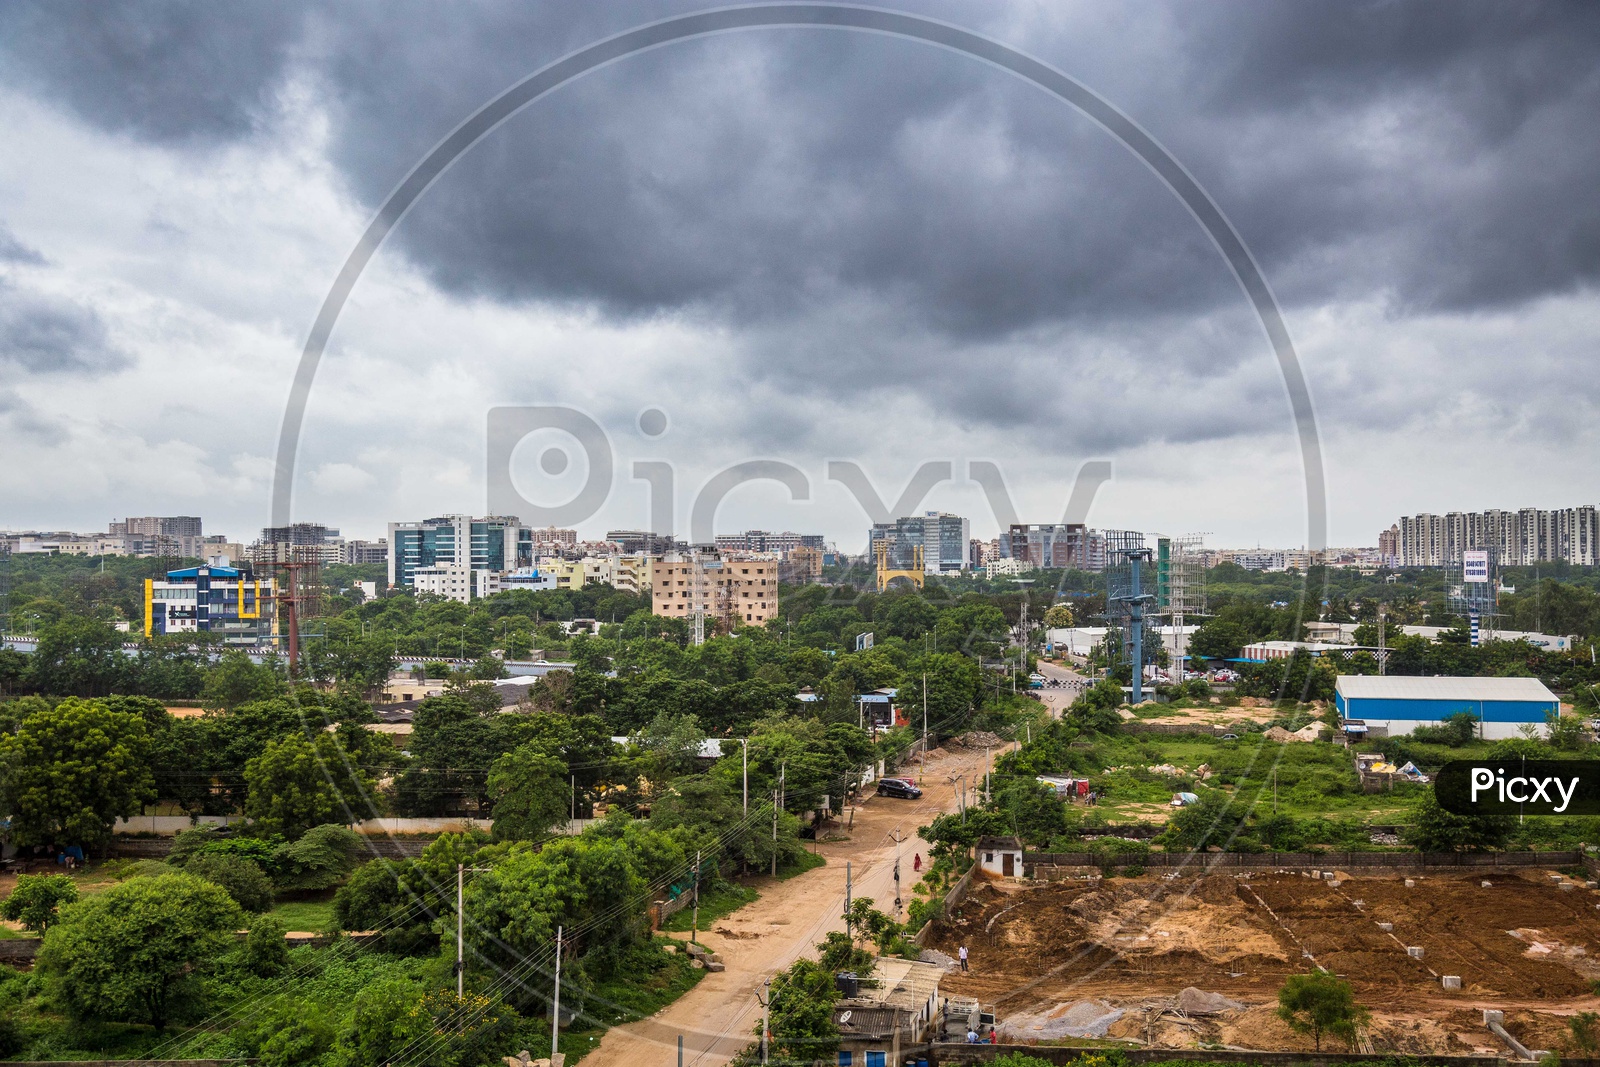 City Scape View With Apartments And Dark Black Clouds In Sky